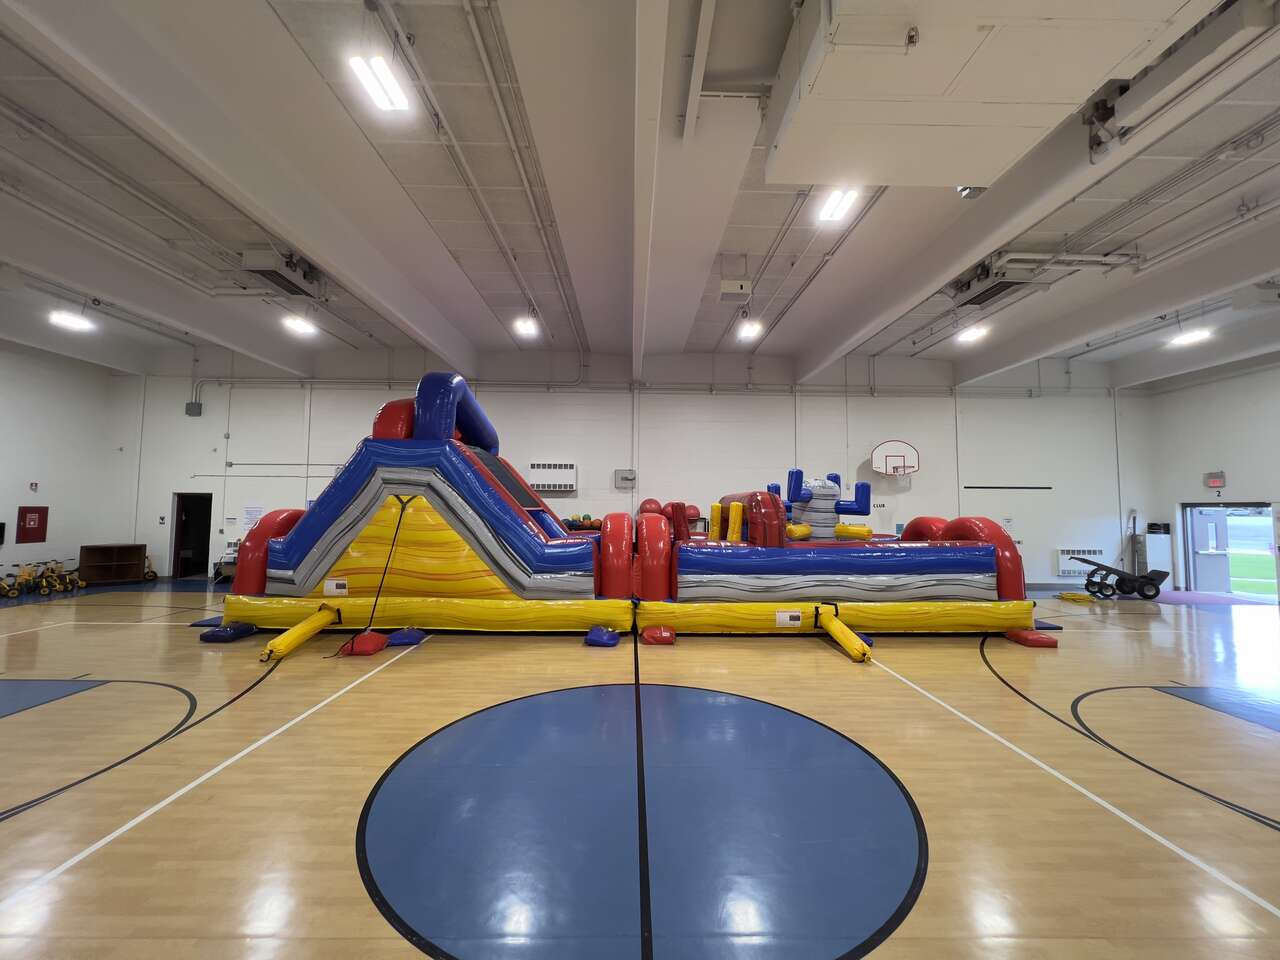 rent an obstacle course by Fun Bounces Rental in Frankfort IL 60443